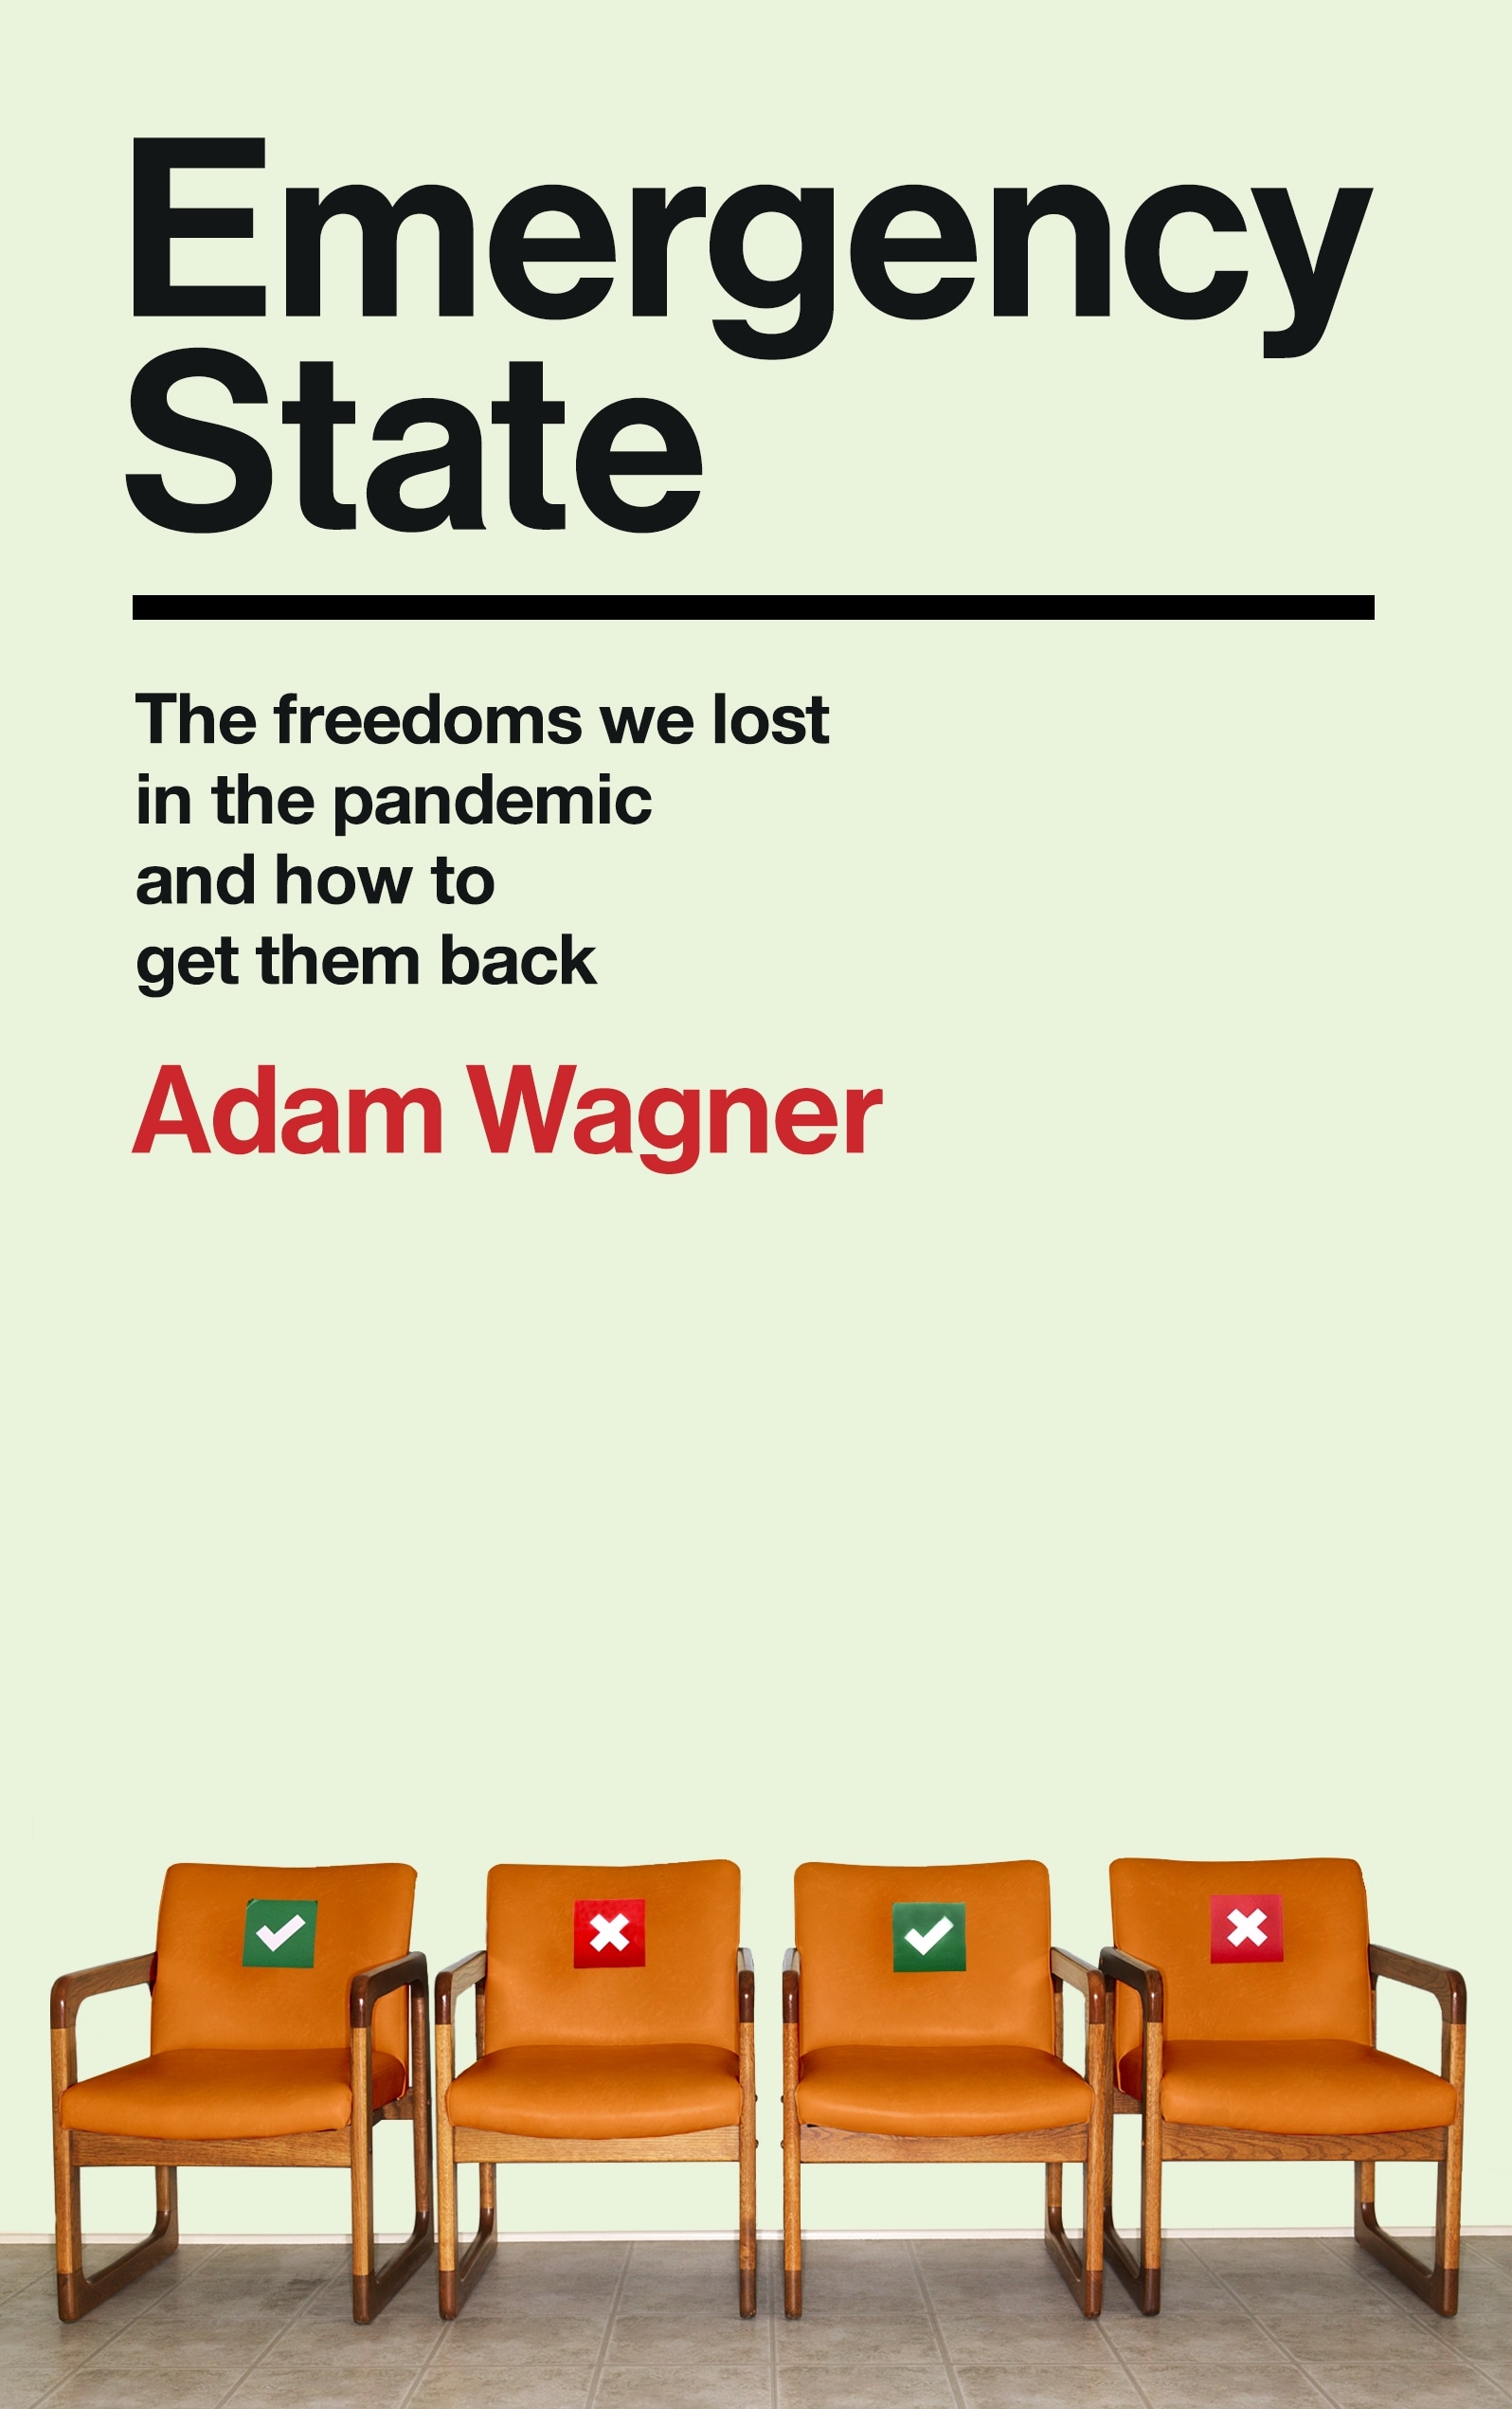 Book “Emergency State” by Adam Wagner — October 13, 2022